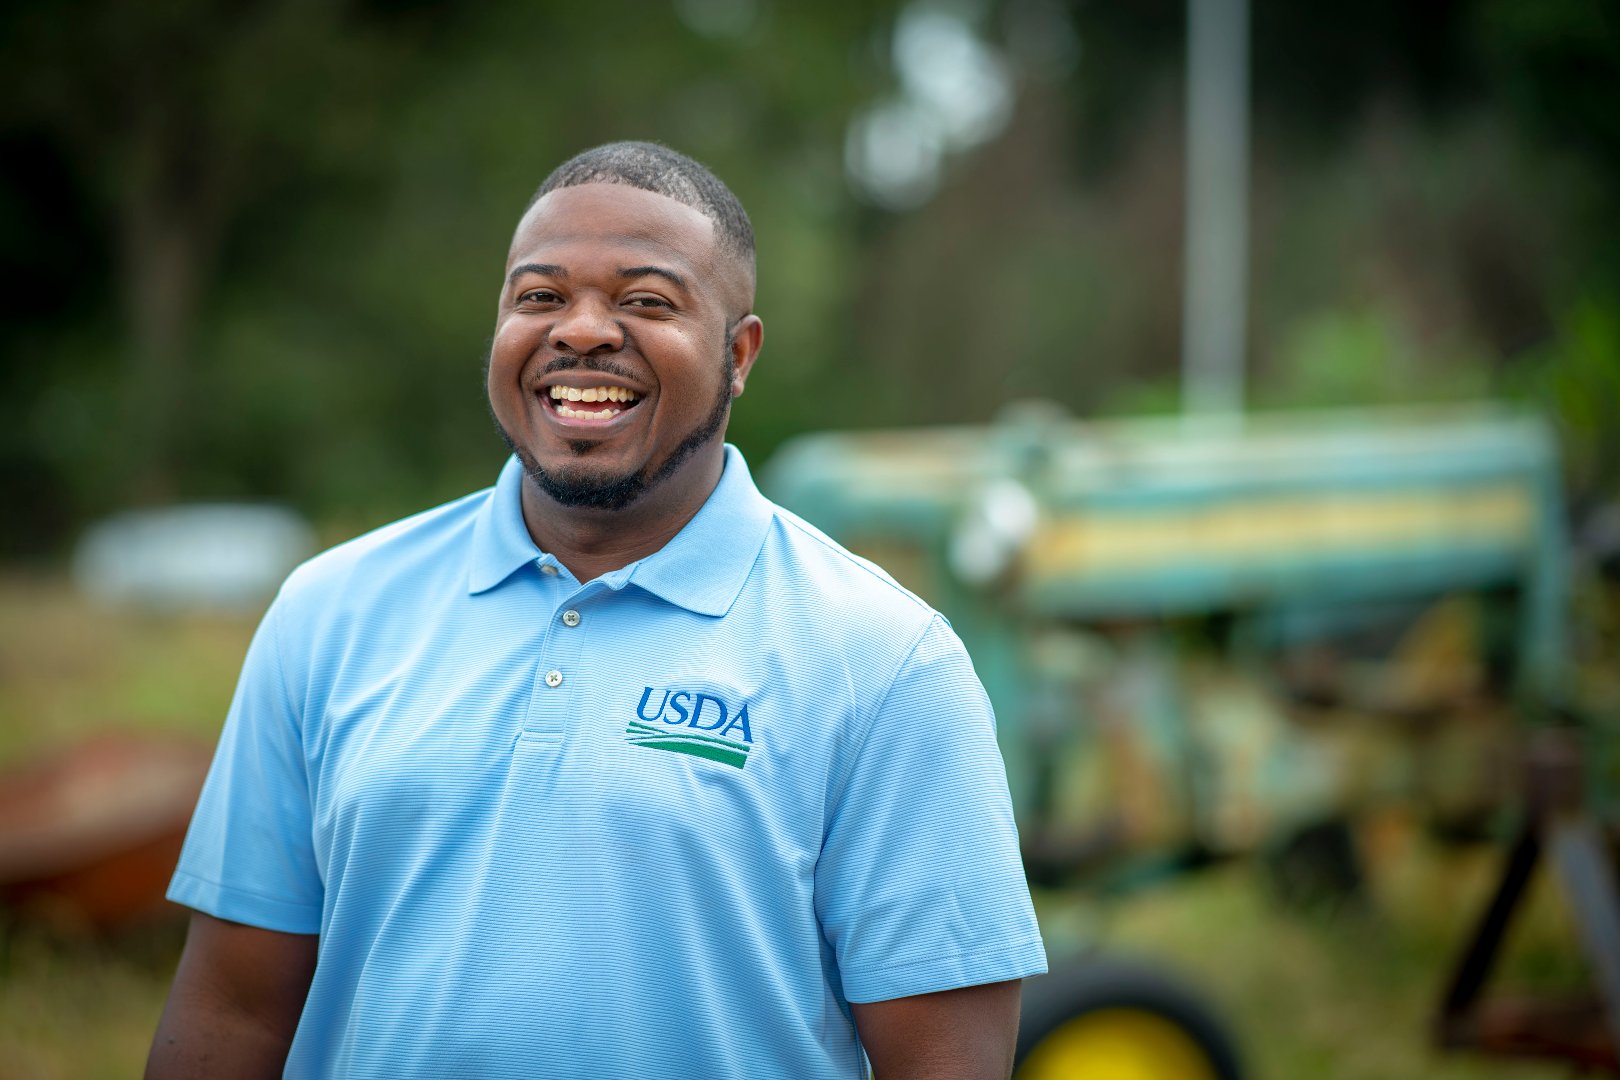 Photo by Preston Keres. Rodney Brooks is the beginning farmer regional coordinator for the U.S. Department of Agriculture’s (USDA) Farm Service Agency (FSA) in Leesburg, Georgia. He has been serving in this position since February 2016.